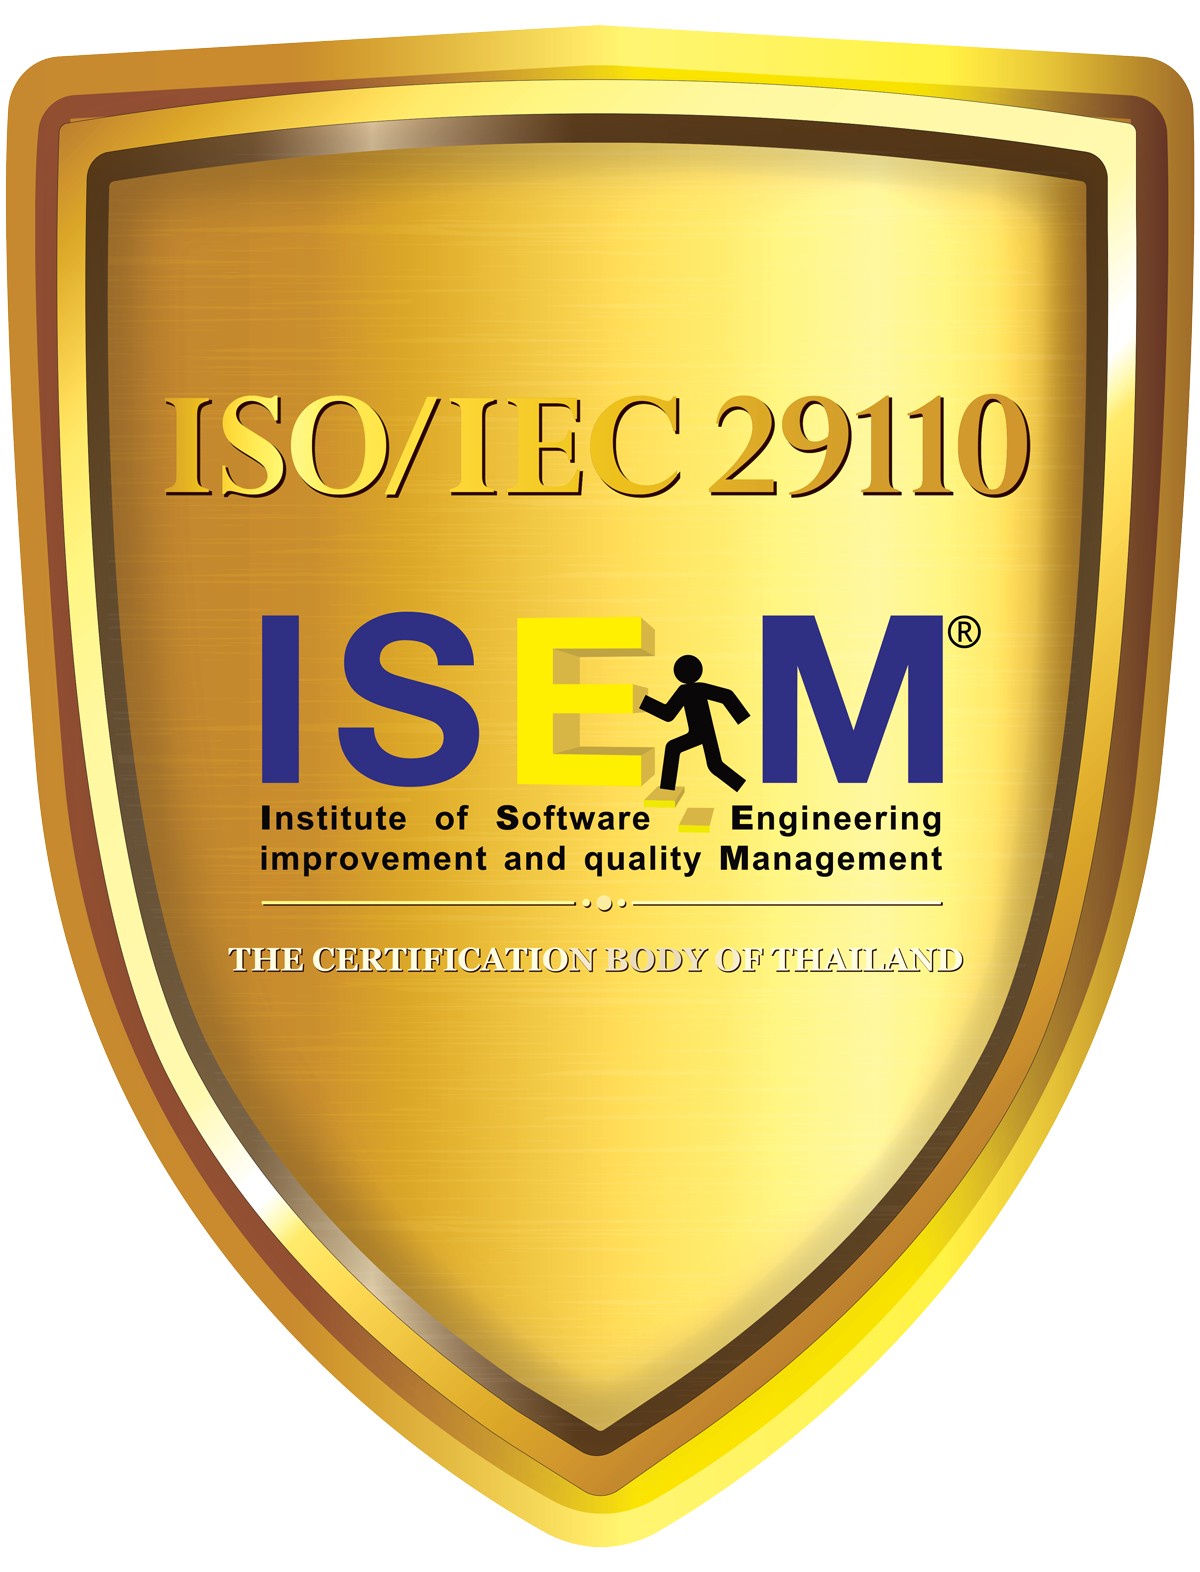 Netway Communication Accredited ISO/IEC 29110-0020, Reinforces Management and Software Engineering Process, Open Wings In Thai And International